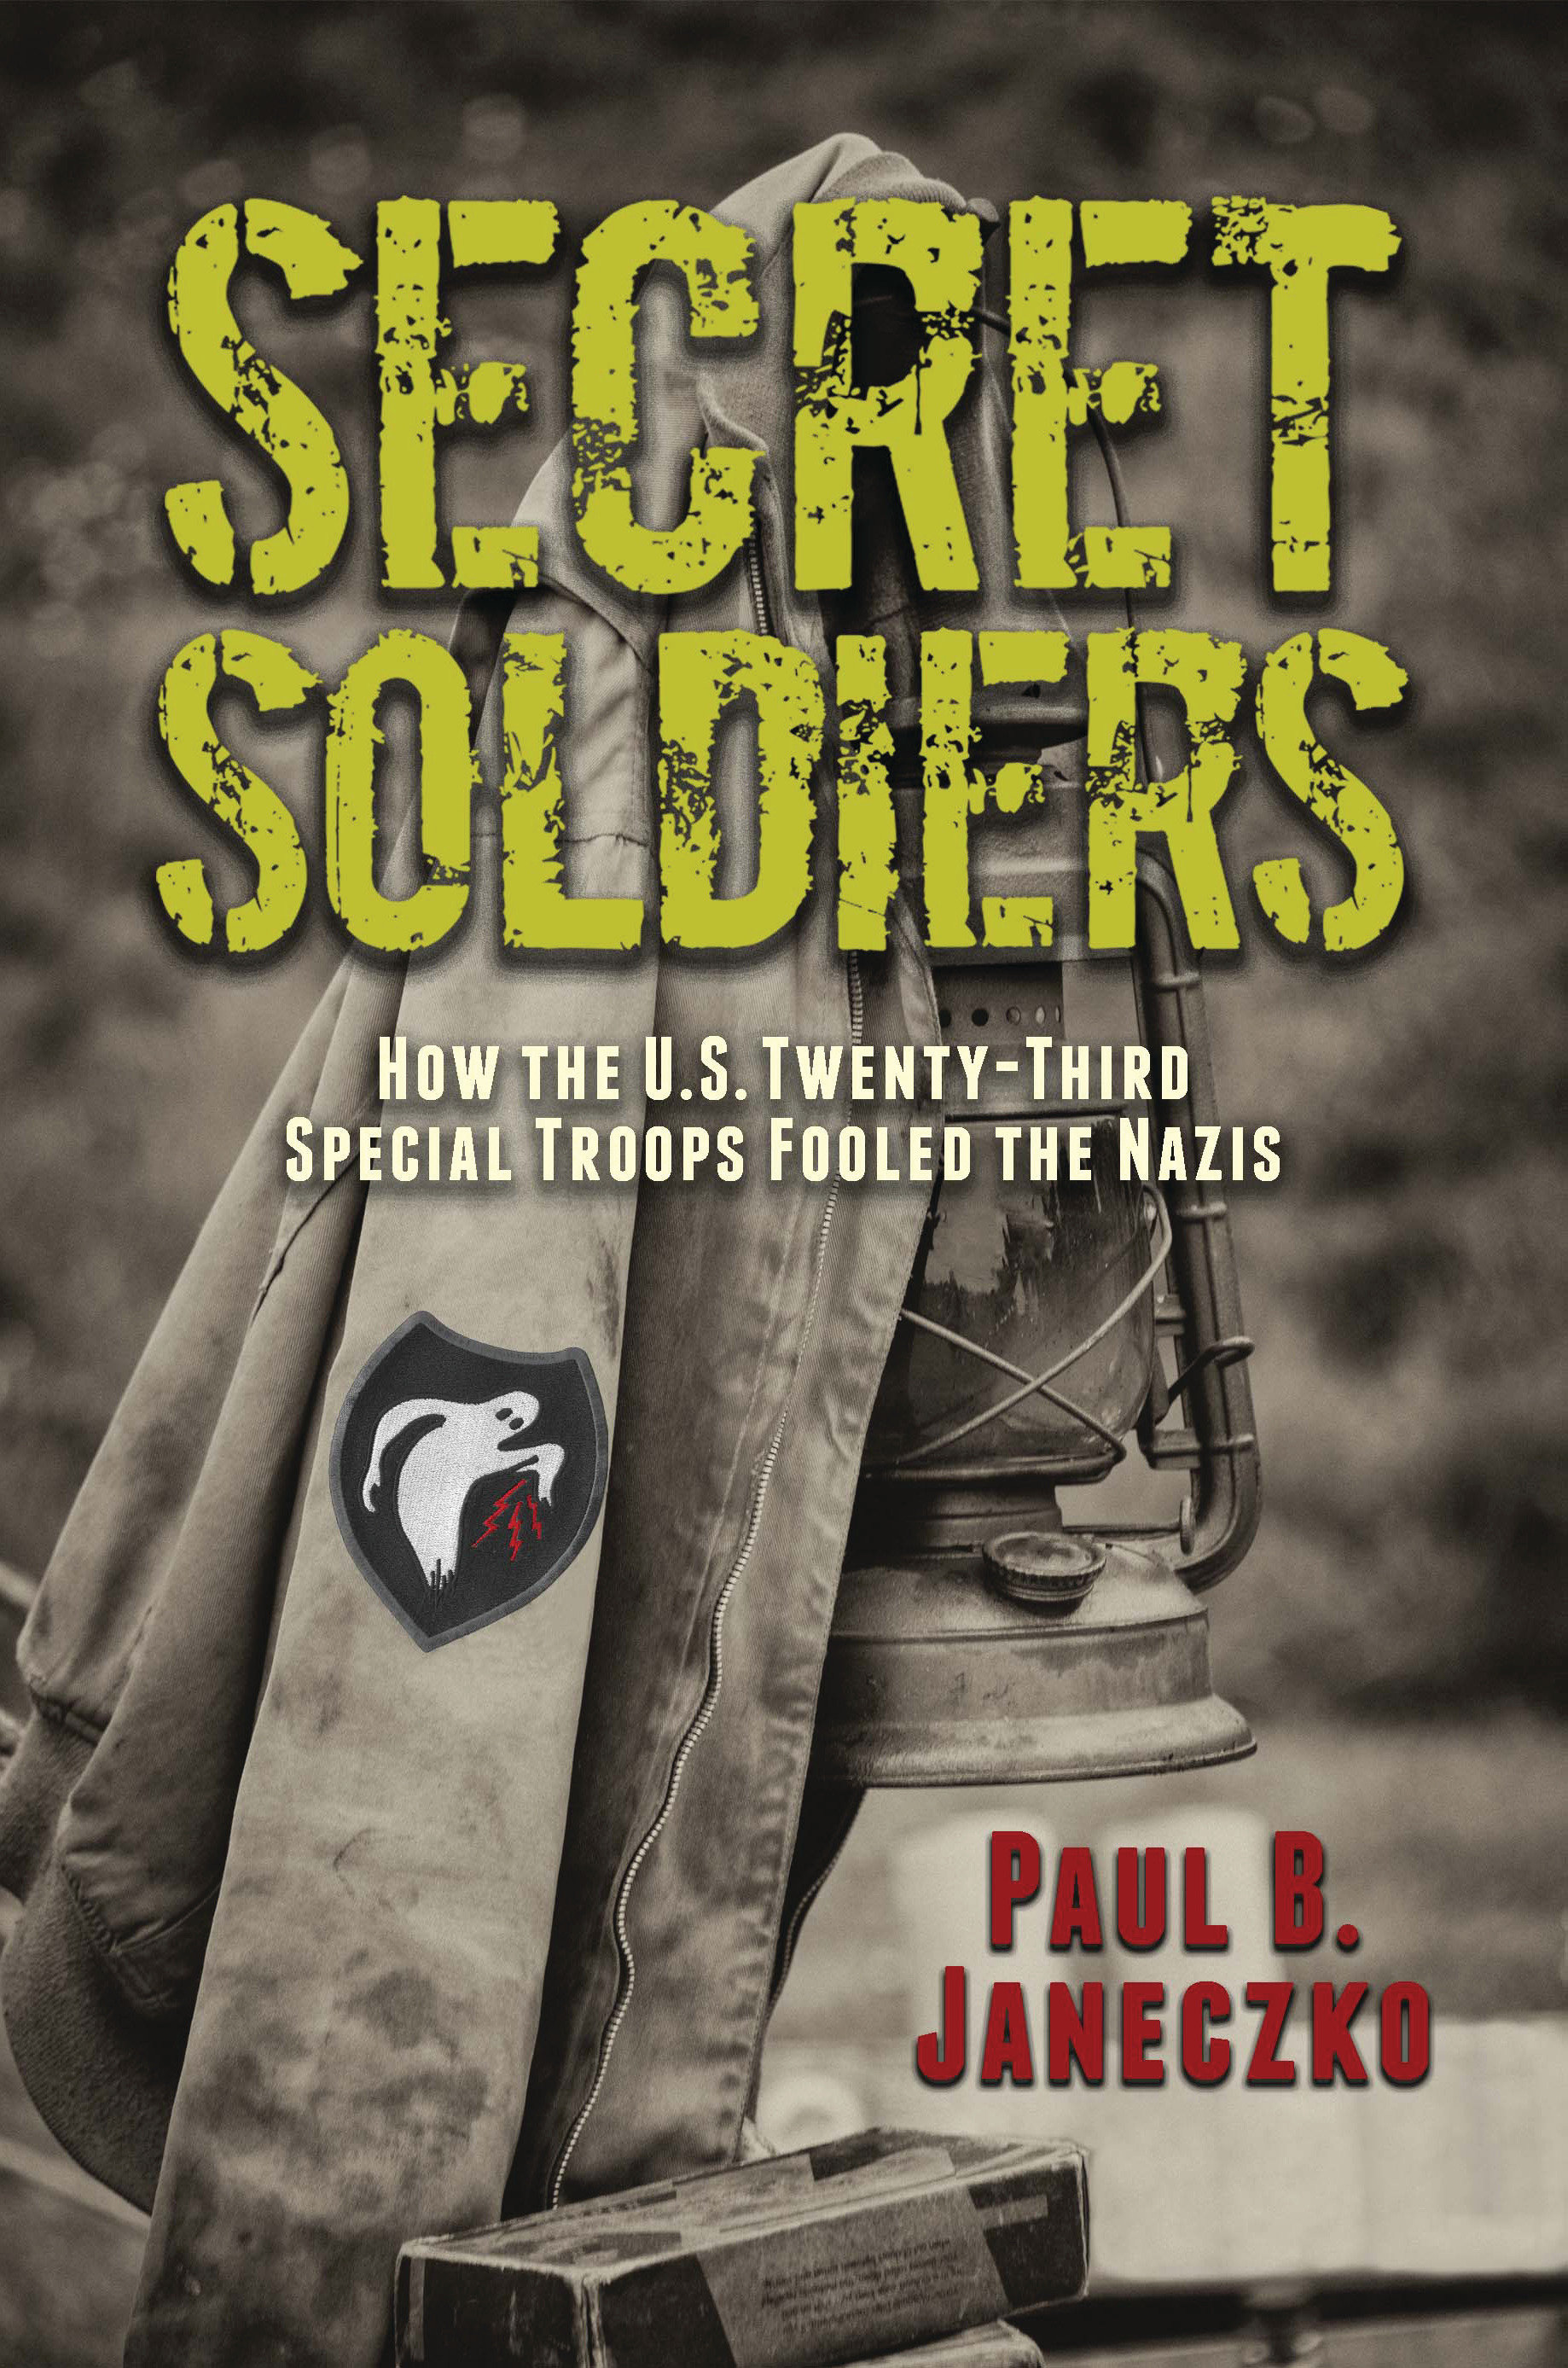 Secret Soldiers: How The U.S. Twenty-Third Special Troops Fooled The Nazis (Hardcover Book)